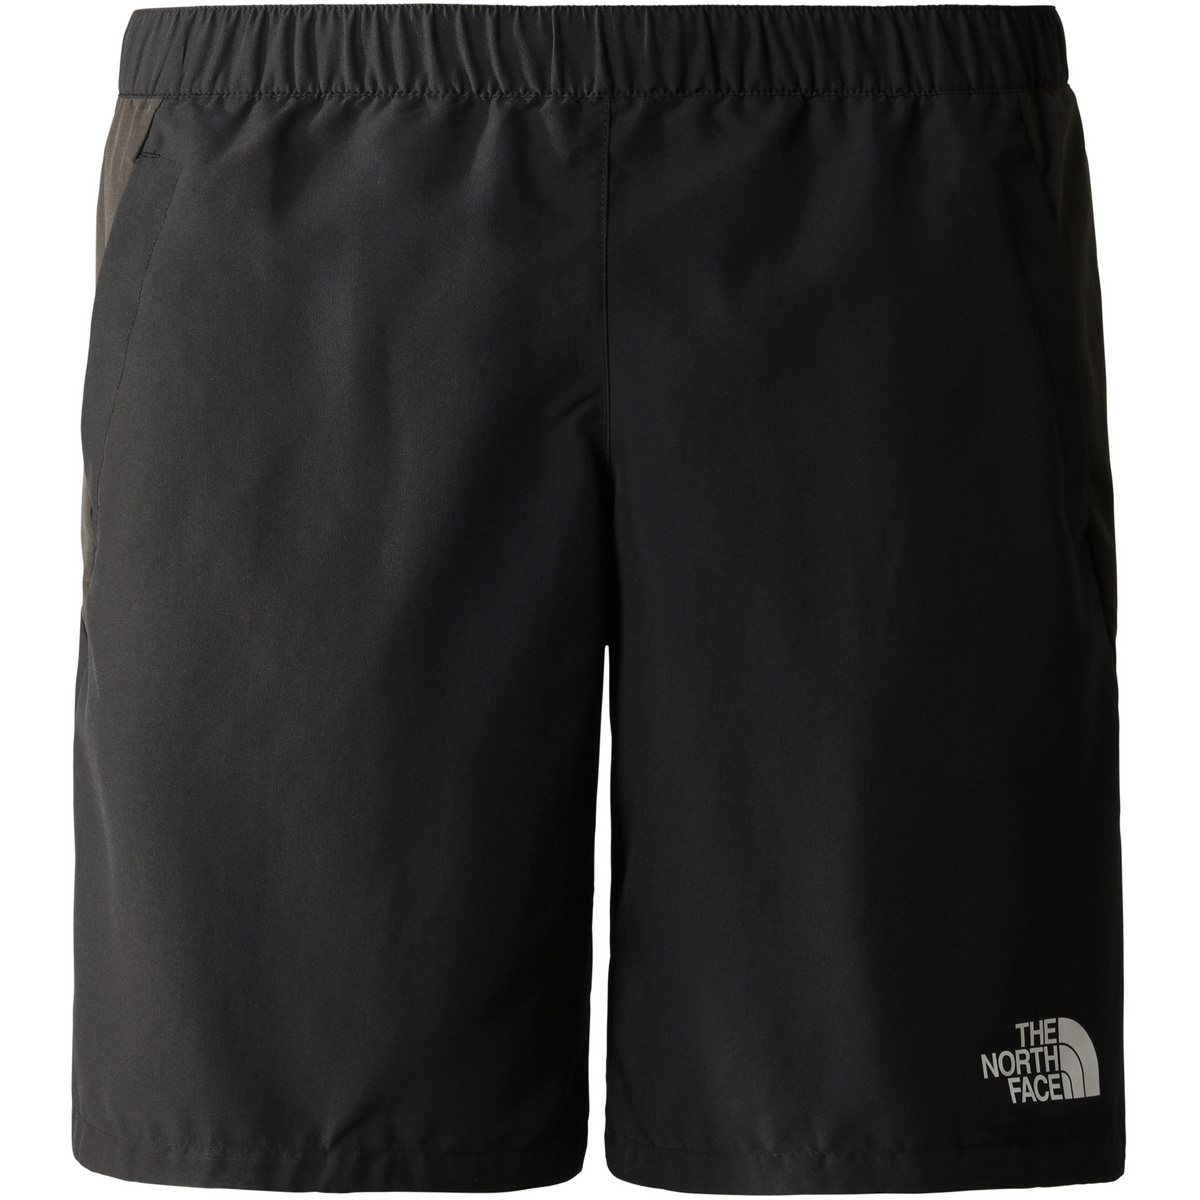 The North Face Herren Ma Woven Shorts von The North Face